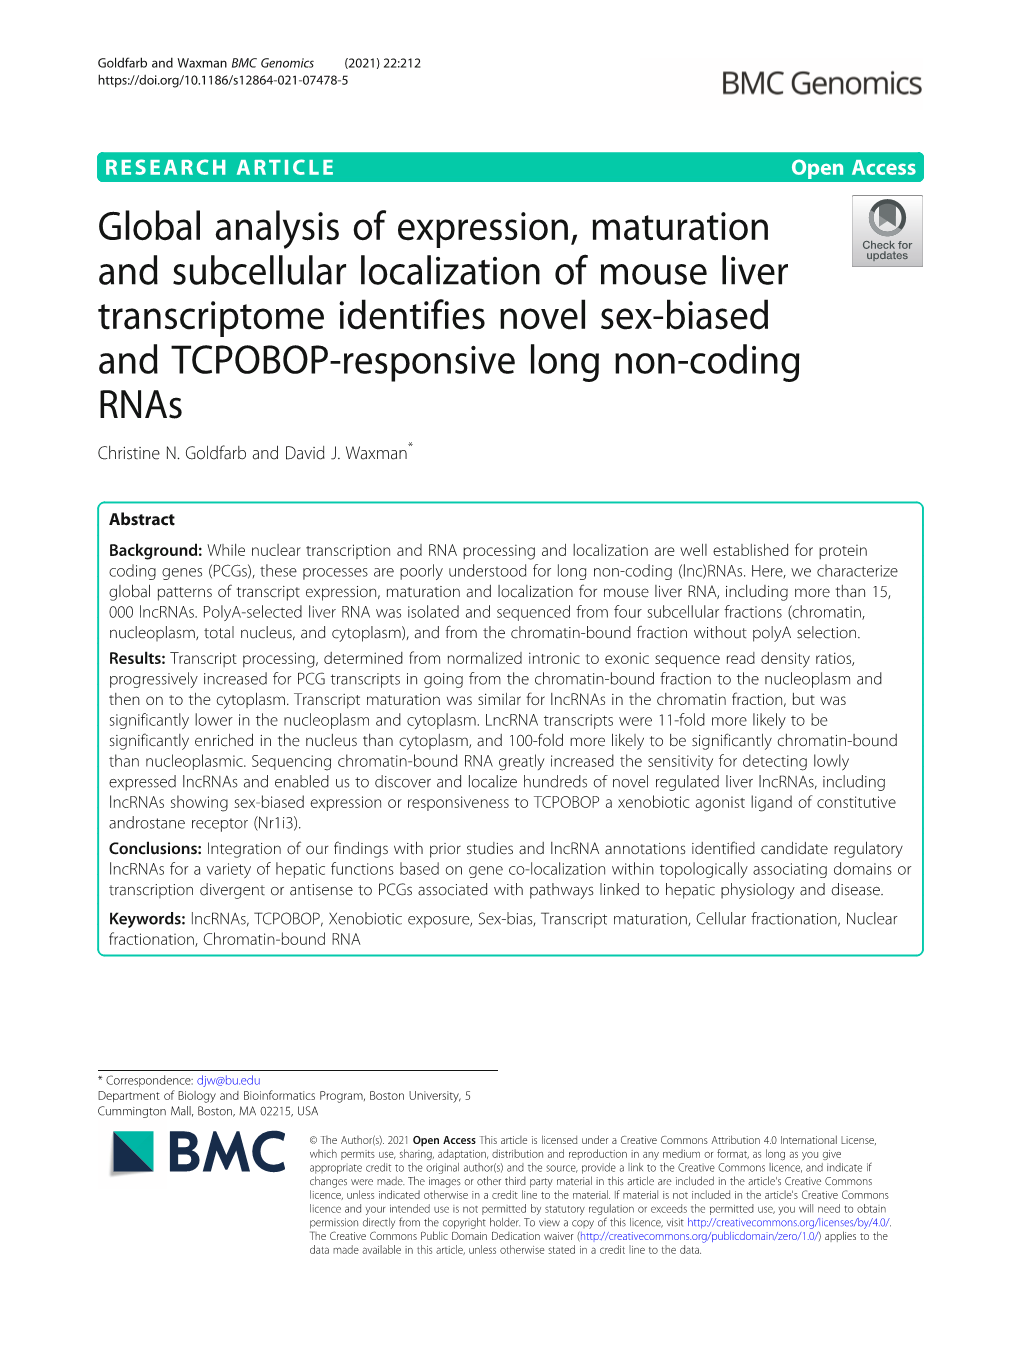 Global Analysis of Expression, Maturation and Subcellular Localization of Mouse Liver Transcriptome Identifies Novel Sex-Biased